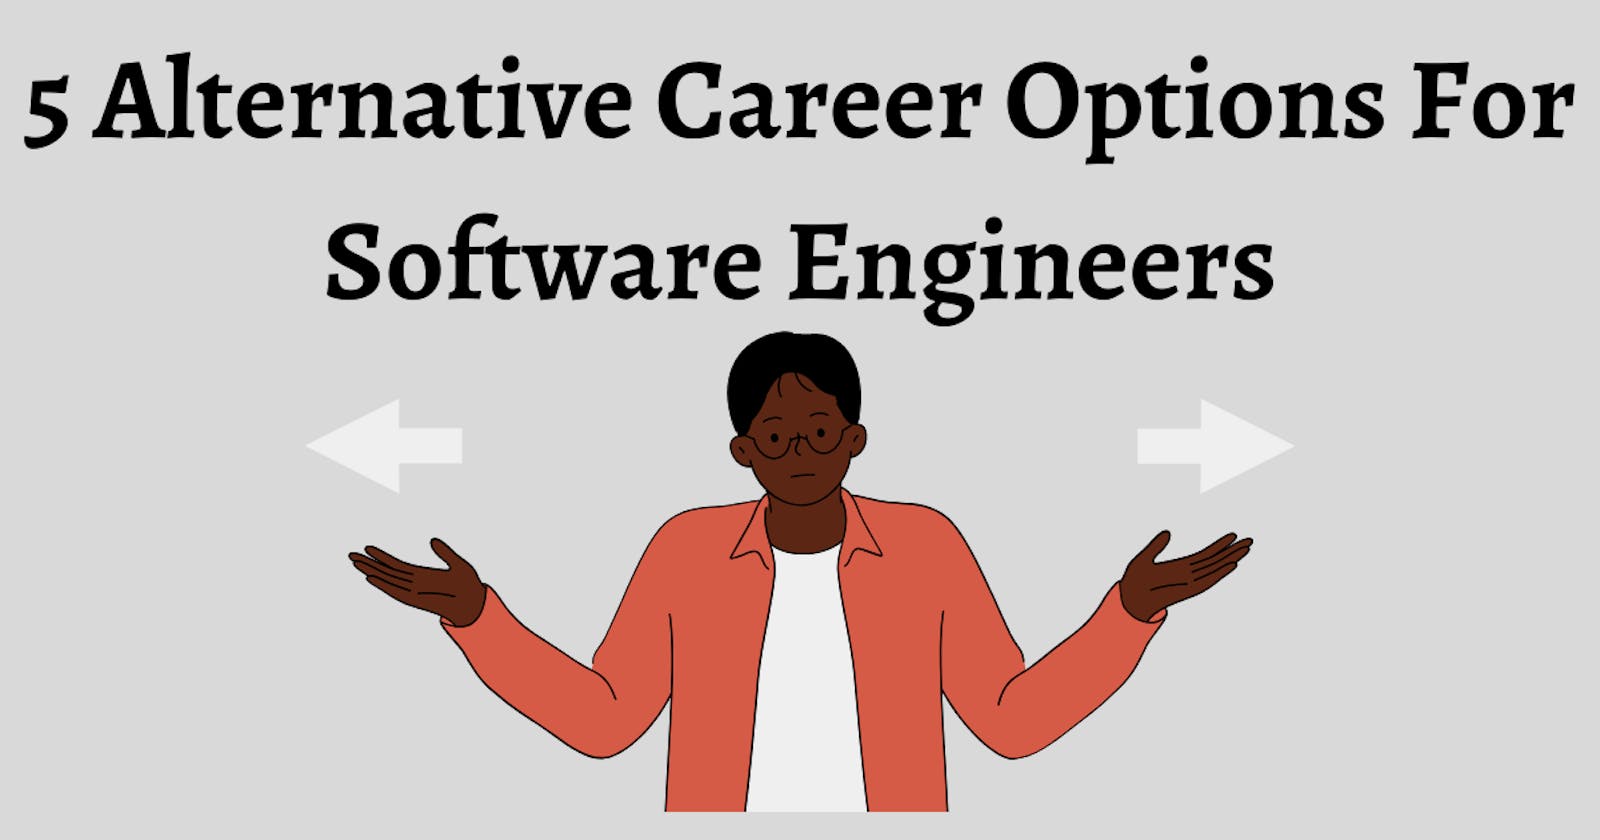 5 Alternative Career Options For Software Engineers